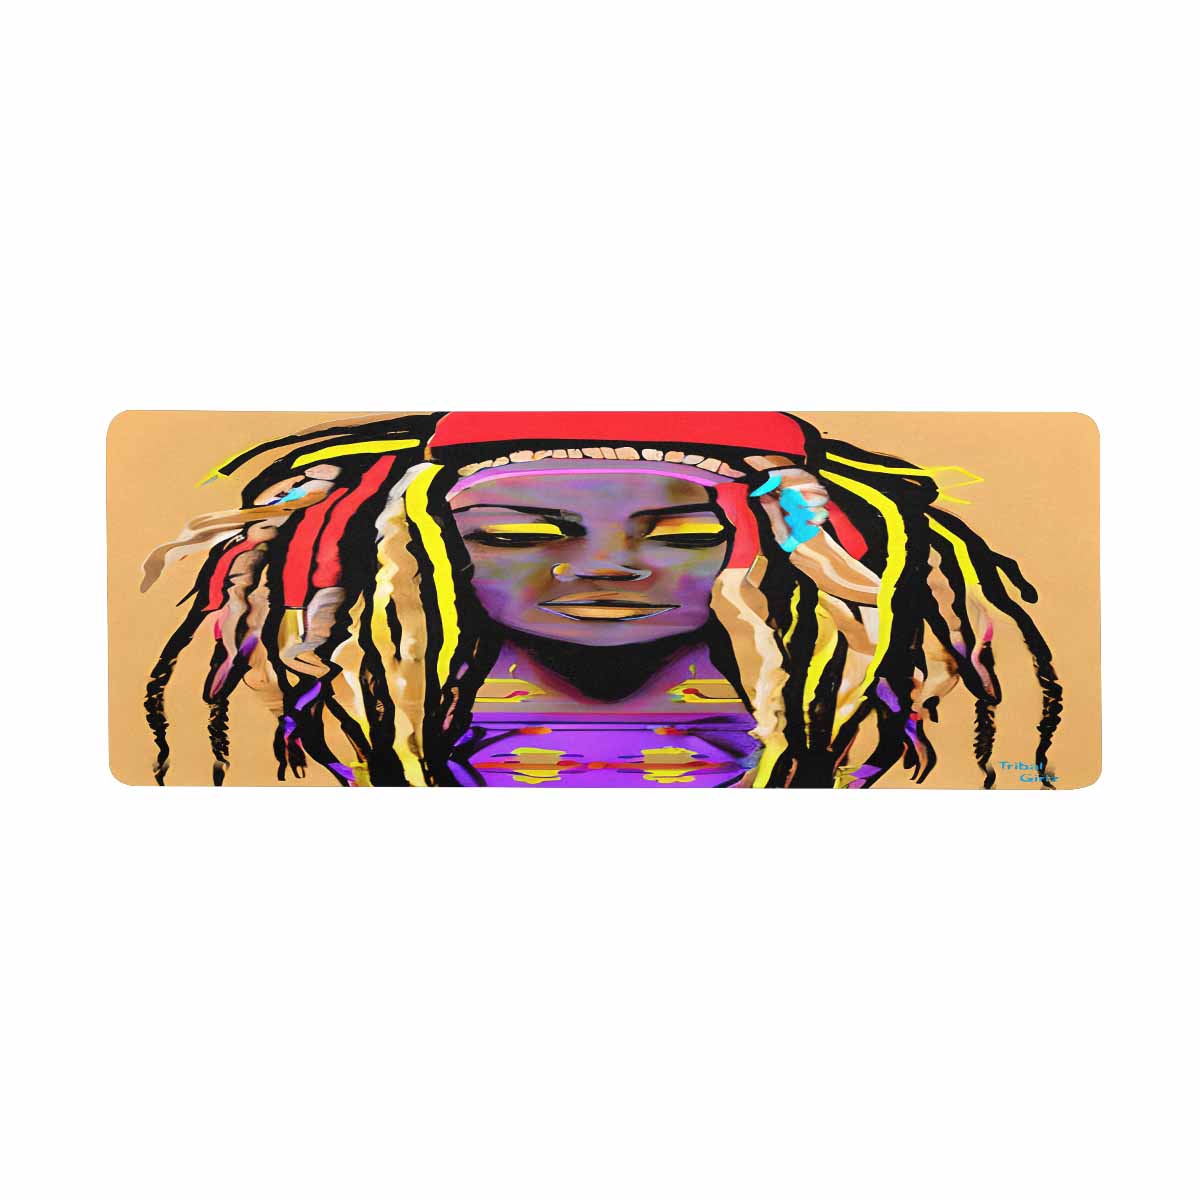 Dreads & Braids, 31 x 12 in large mouse pad, Fulangiara 14